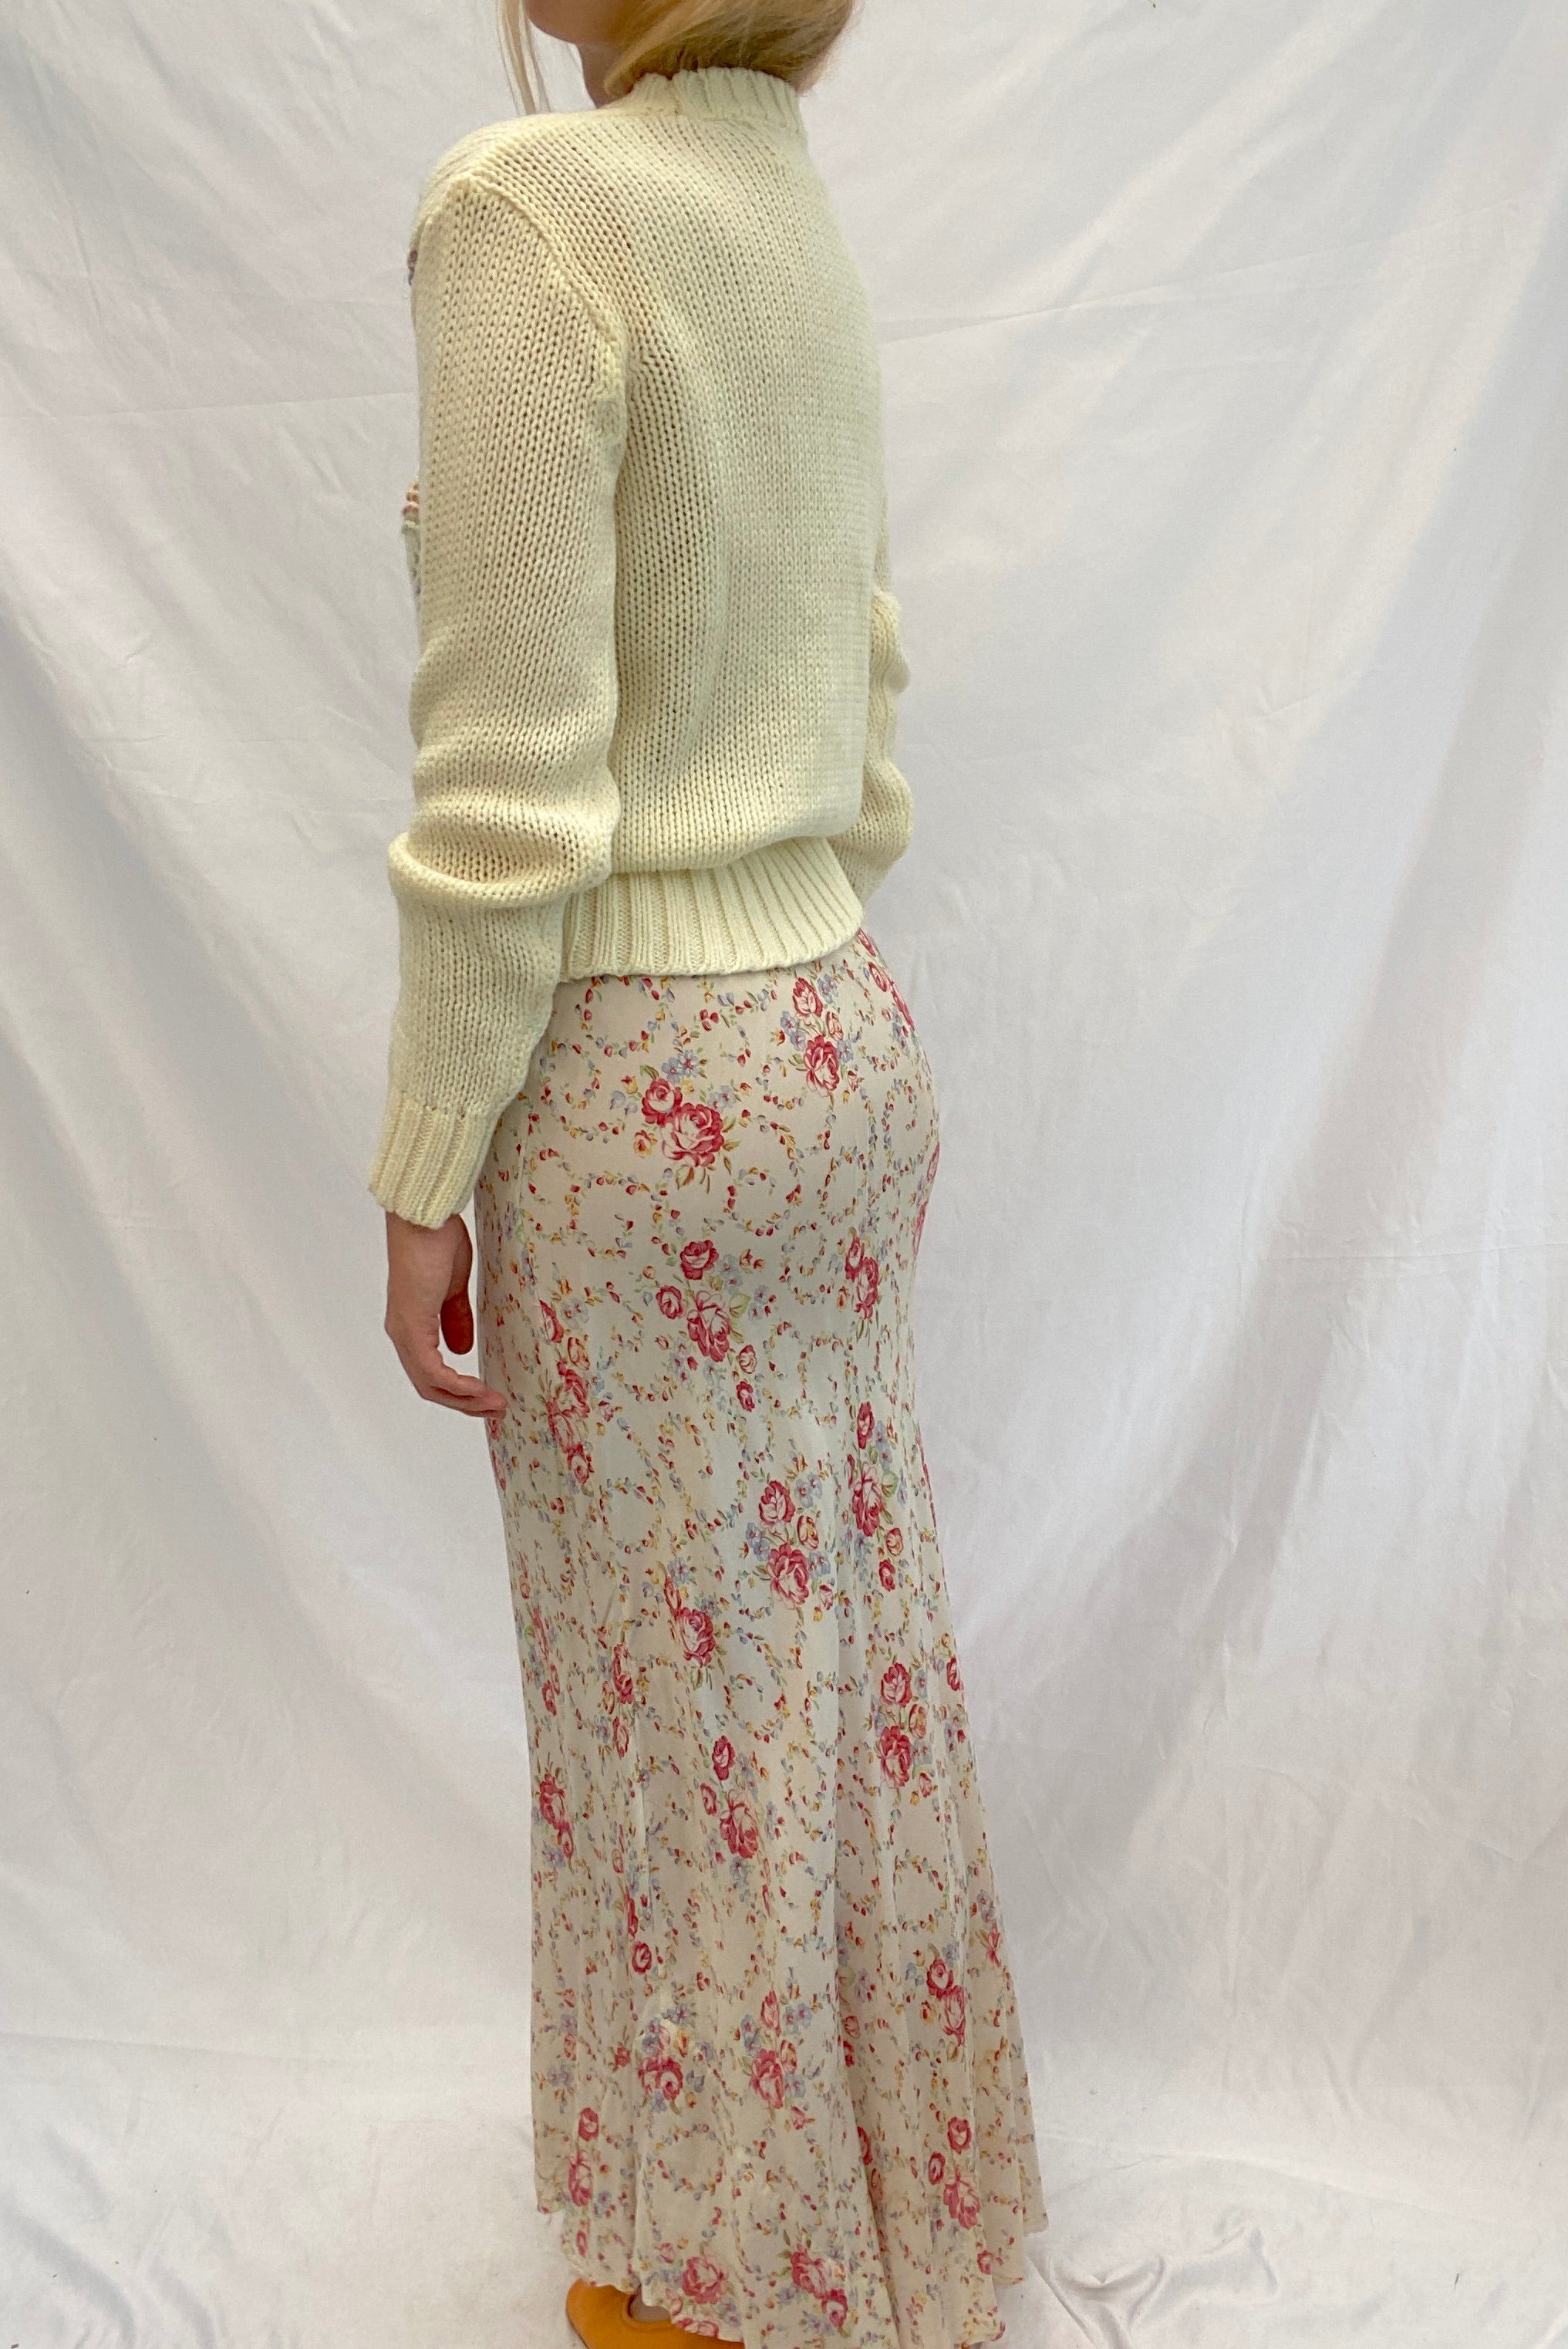 Cream Knit Sweater with Floral Pattern